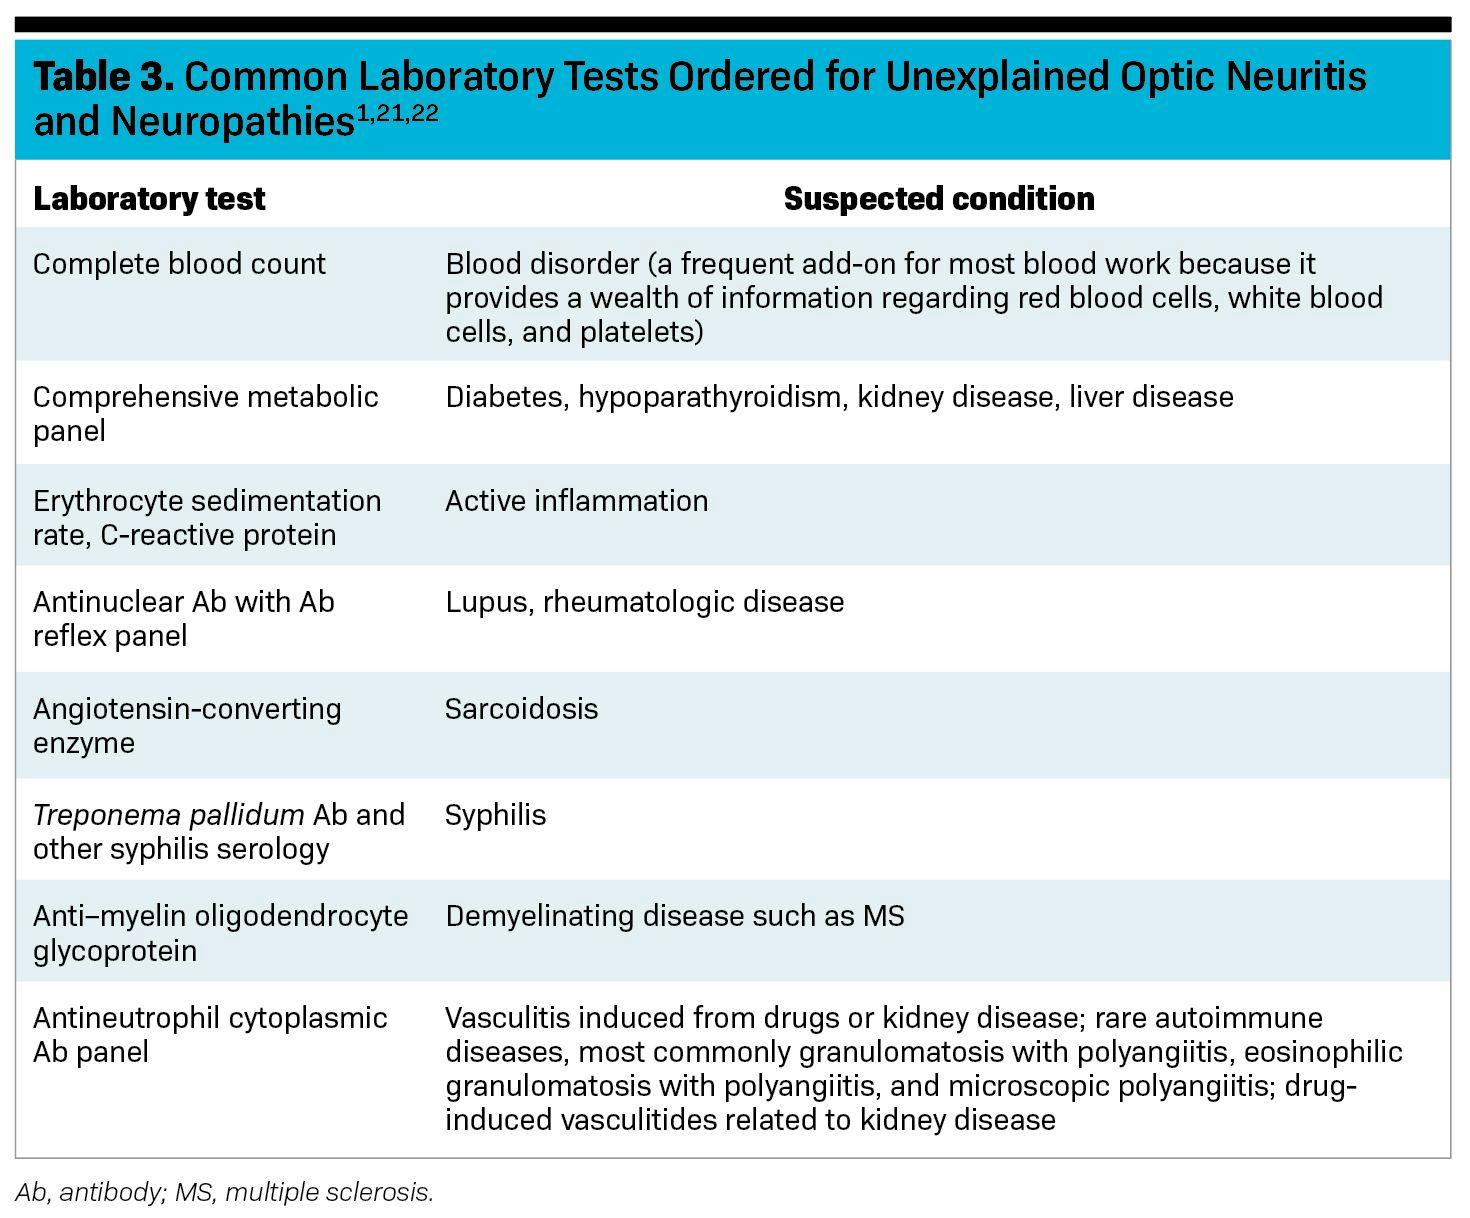 Table 3. Common laboratory tests ordered for unexplained optic neuritis and neuropathies